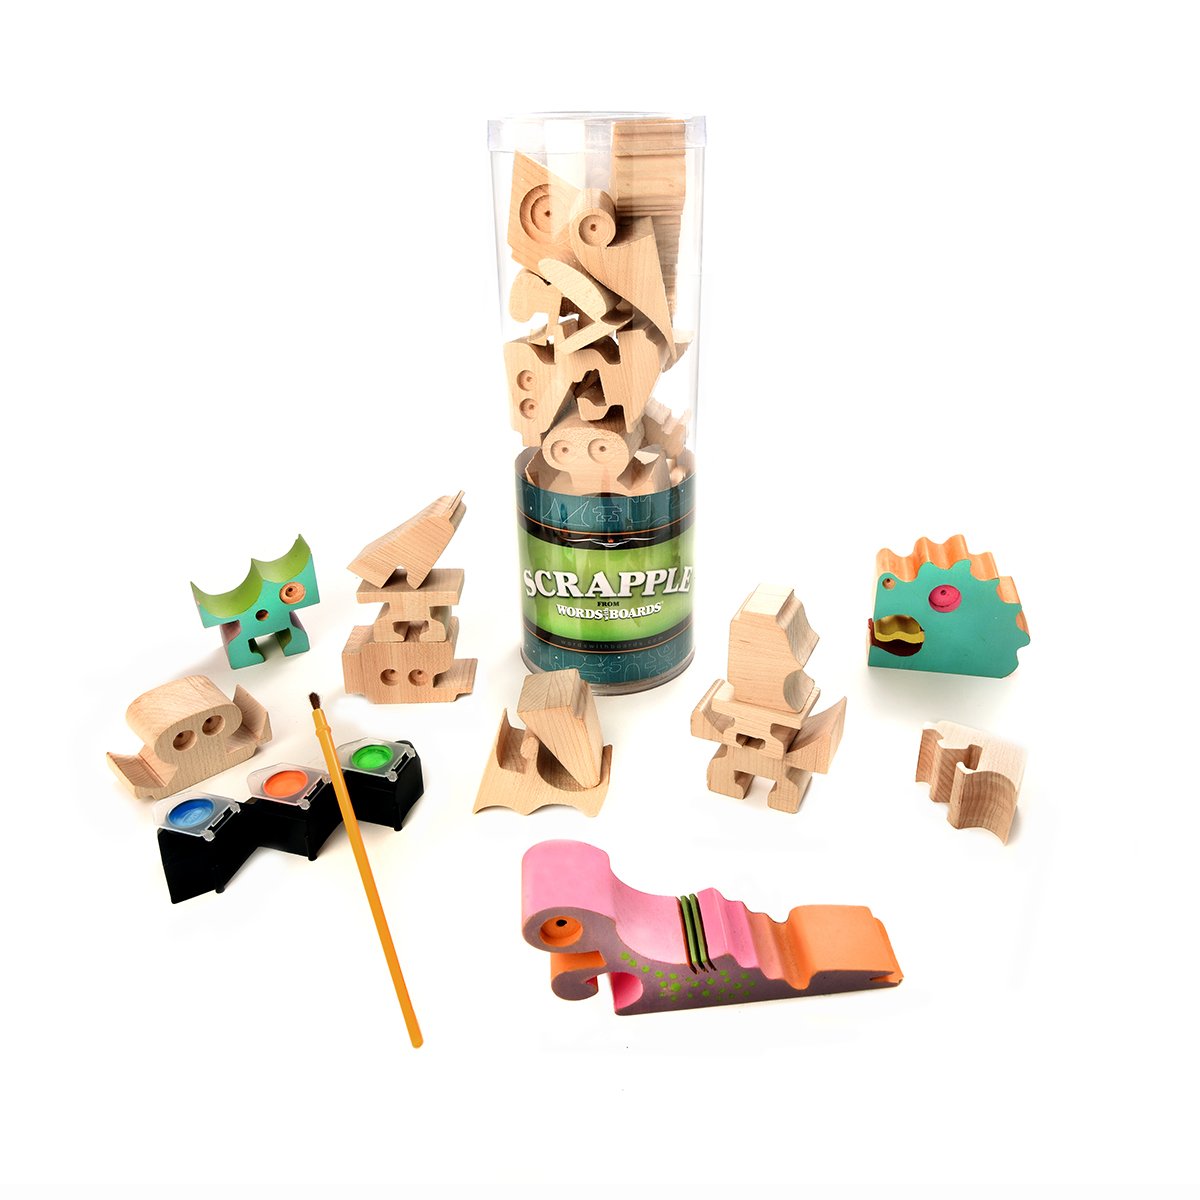 WOODEN TOYS - all pieces shown in packaging